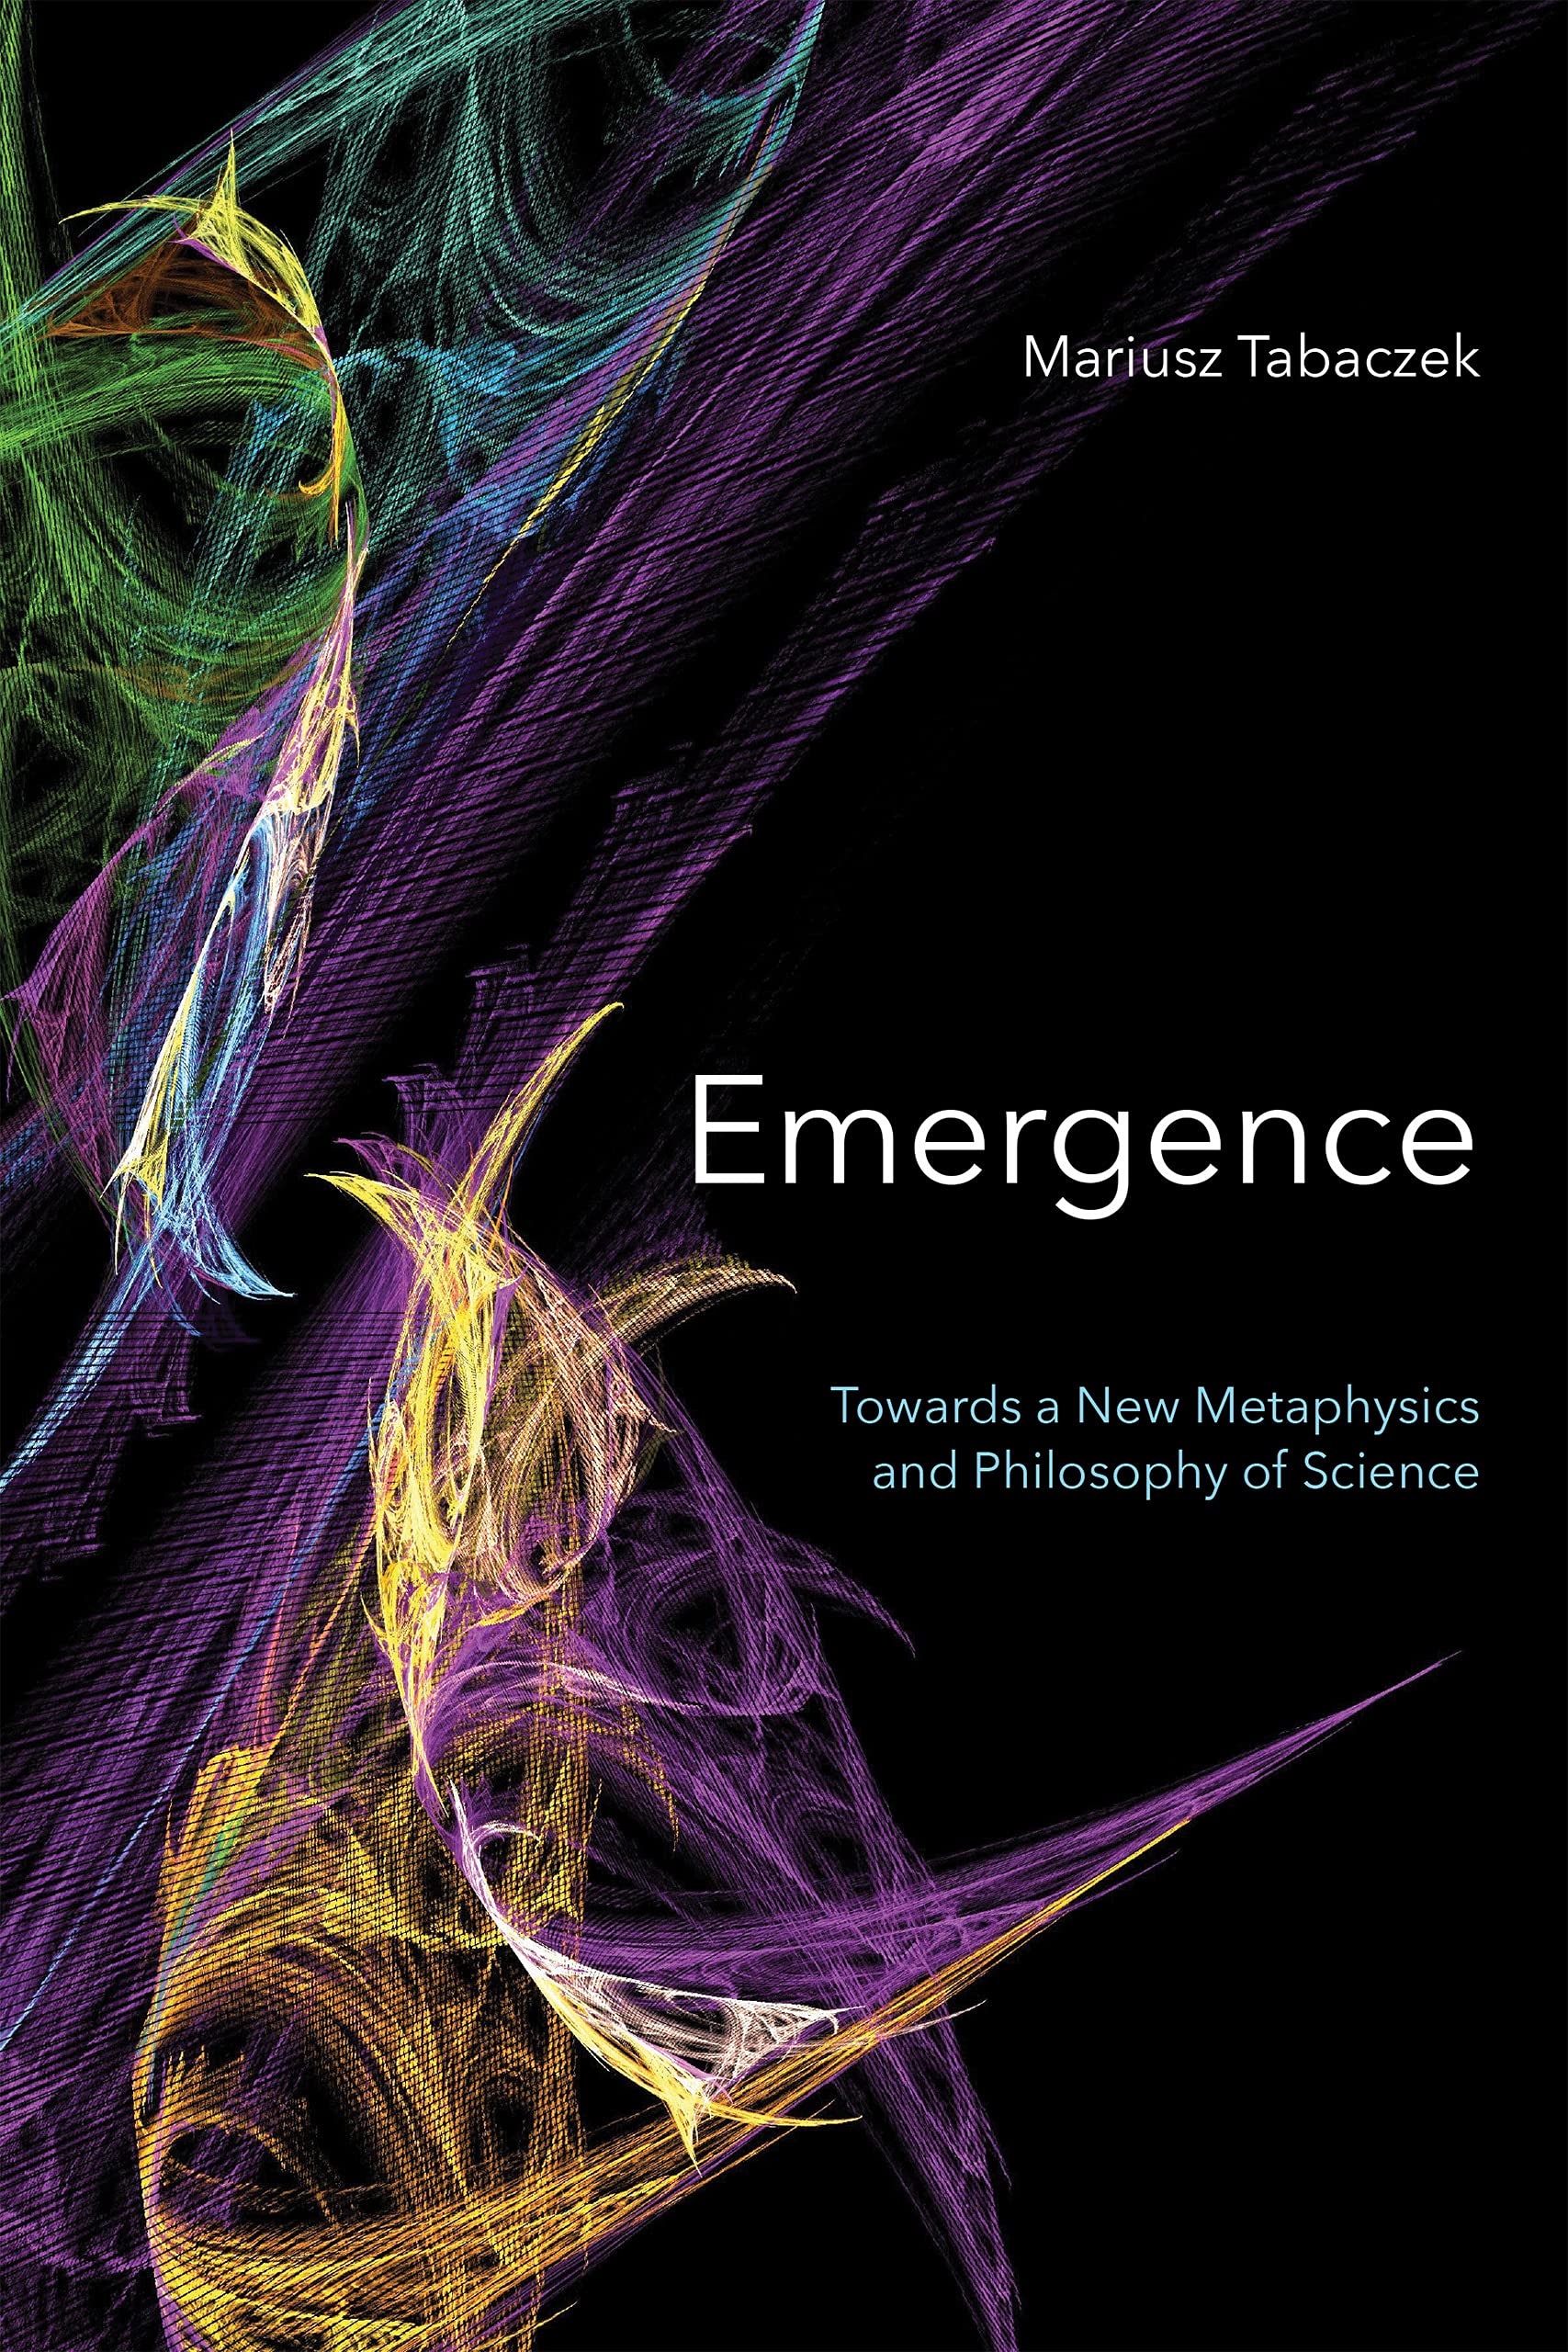 Emergence (Towards A New Metaphysics and Philosophy of Science) book cover